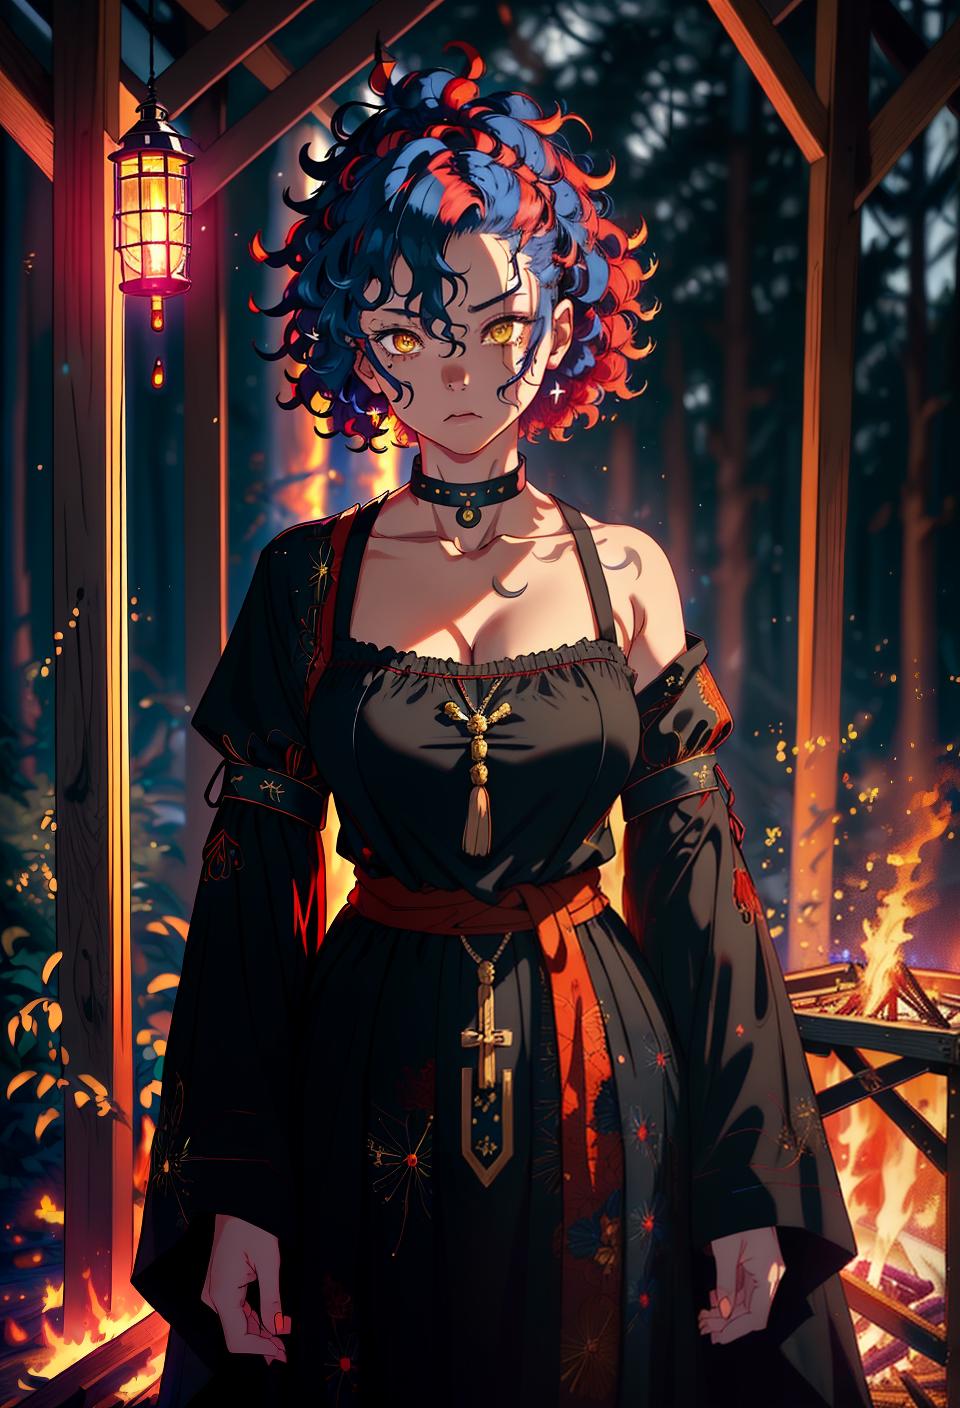  ((trending, highres, masterpiece, cinematic shot)), 1girl, mature, female religious outfit, large, campfire scene, medium-length curly blue hair, shaved head, narrow yellow eyes, lazy personality, scared expression, red skin, magical, energetic